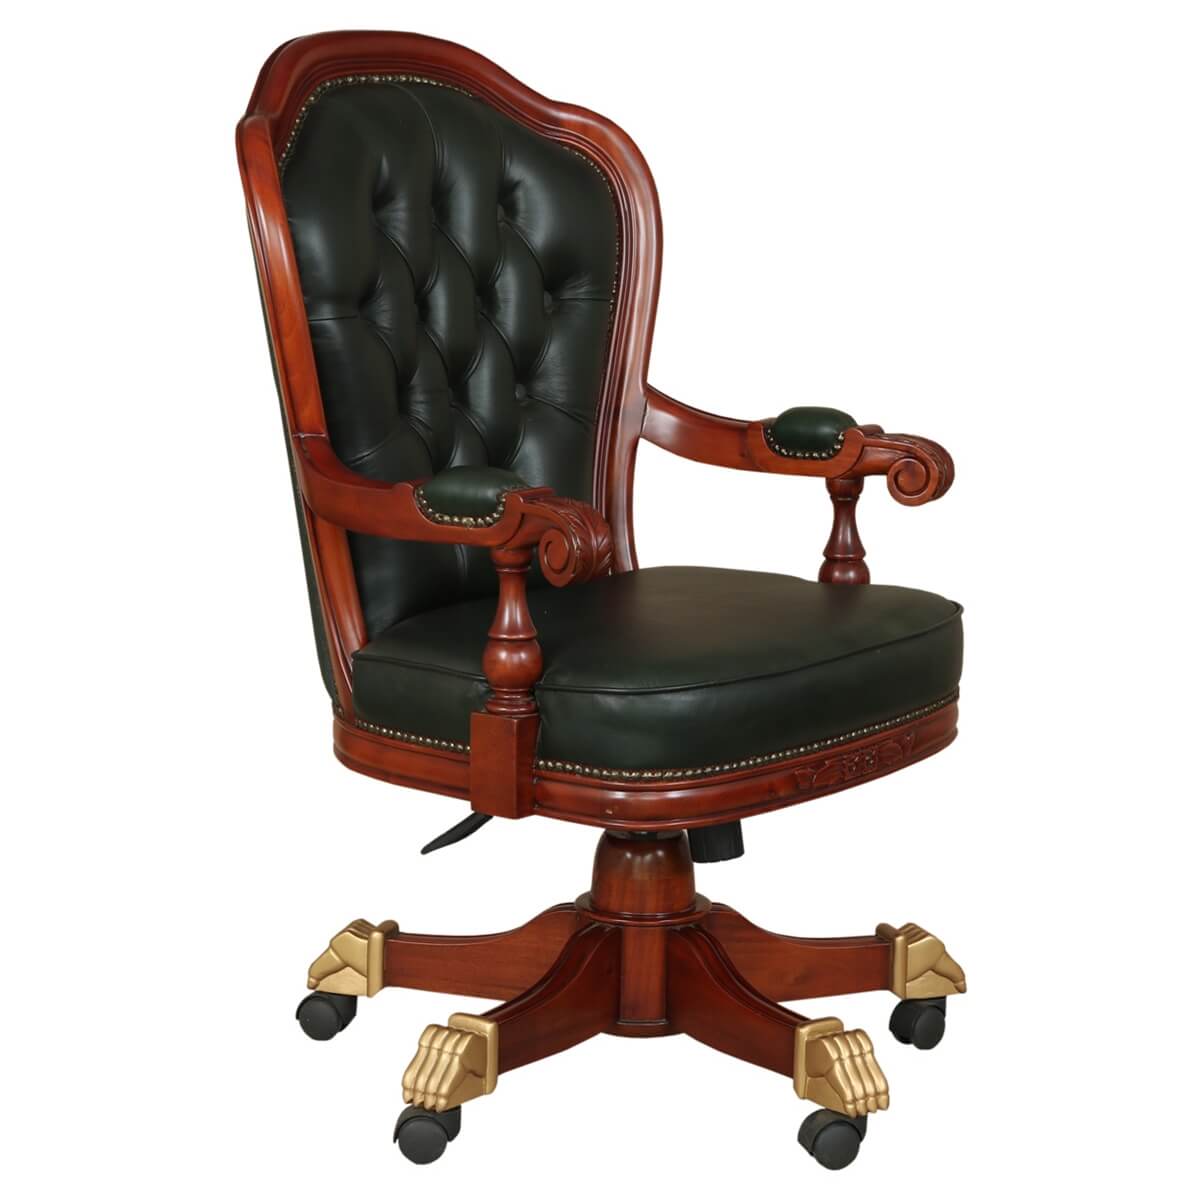 https://www.sierralivingconcepts.com/images/thumbs/0400428_sevan-mahogany-wood-leather-tufted-rolling-executive-office-chair.jpeg